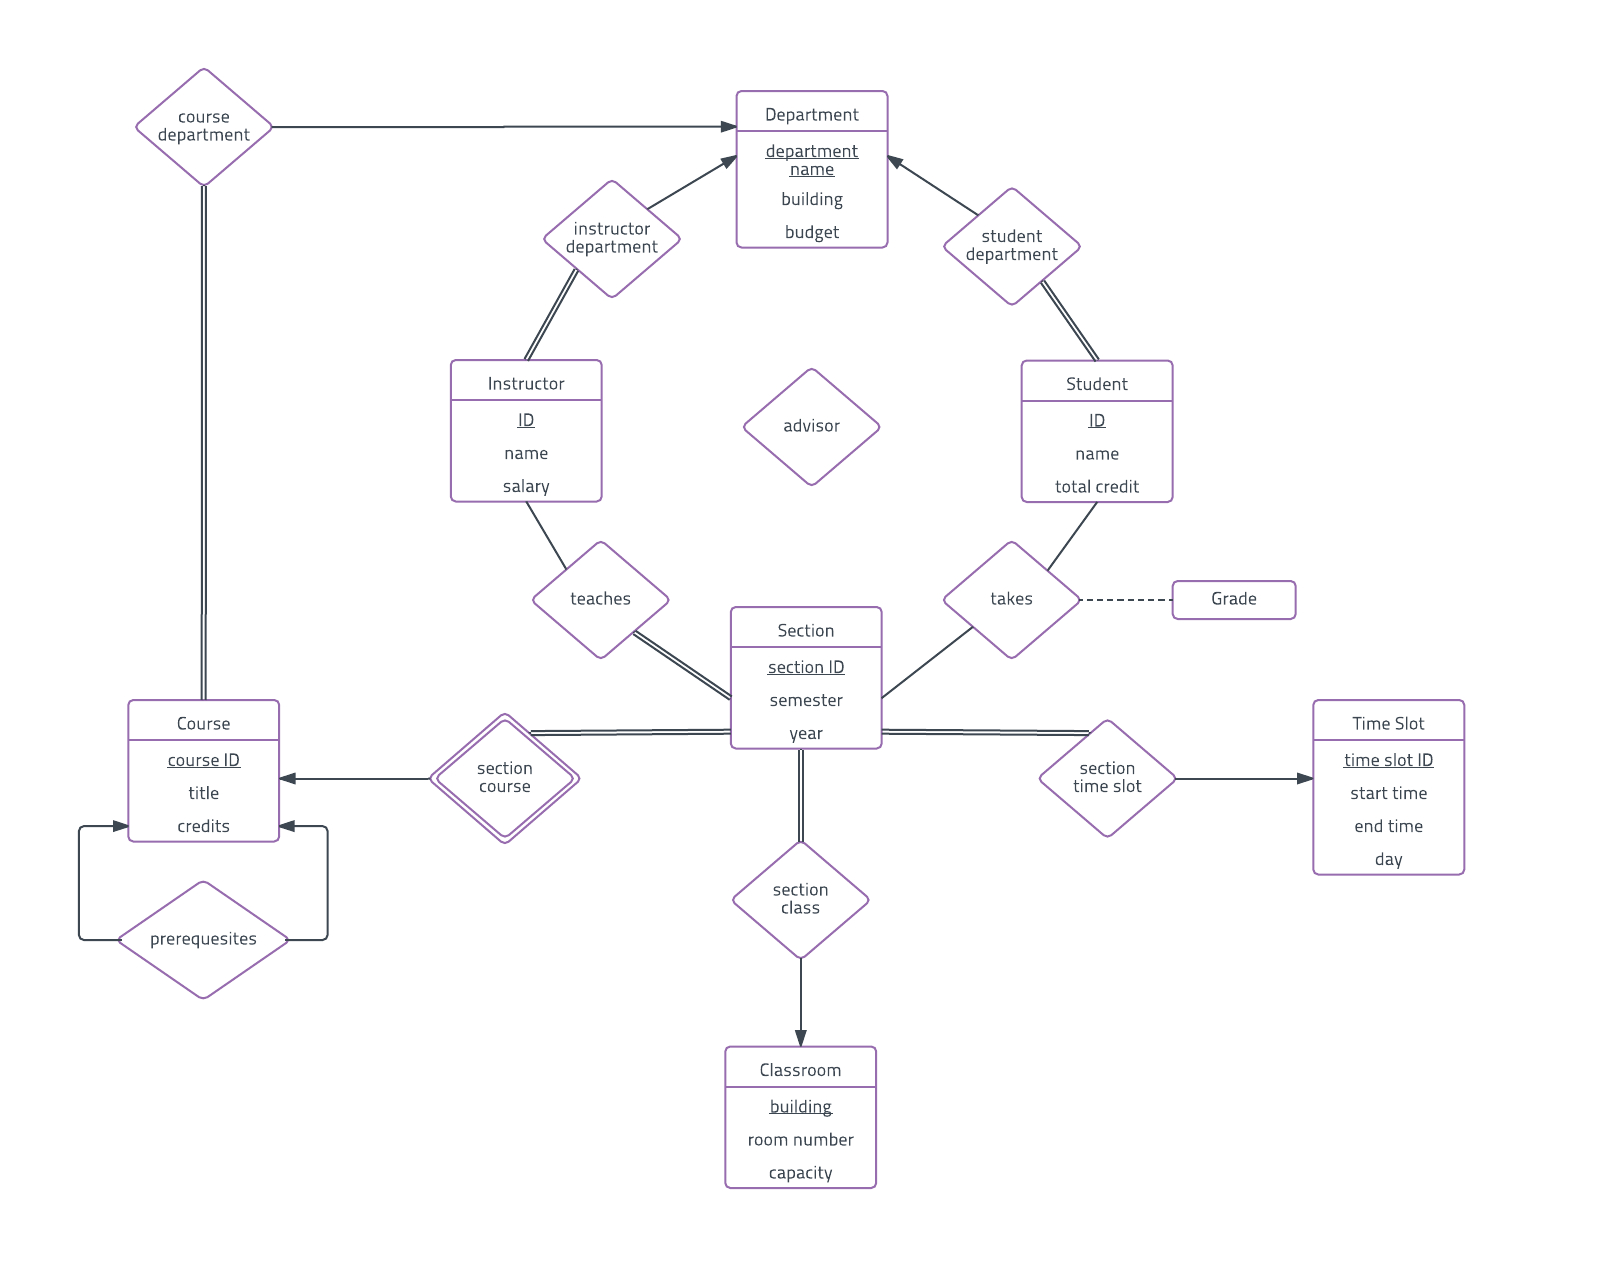 Er Diagram Examples And Templates | Lucidchart with Er Diagram Examples With Questions